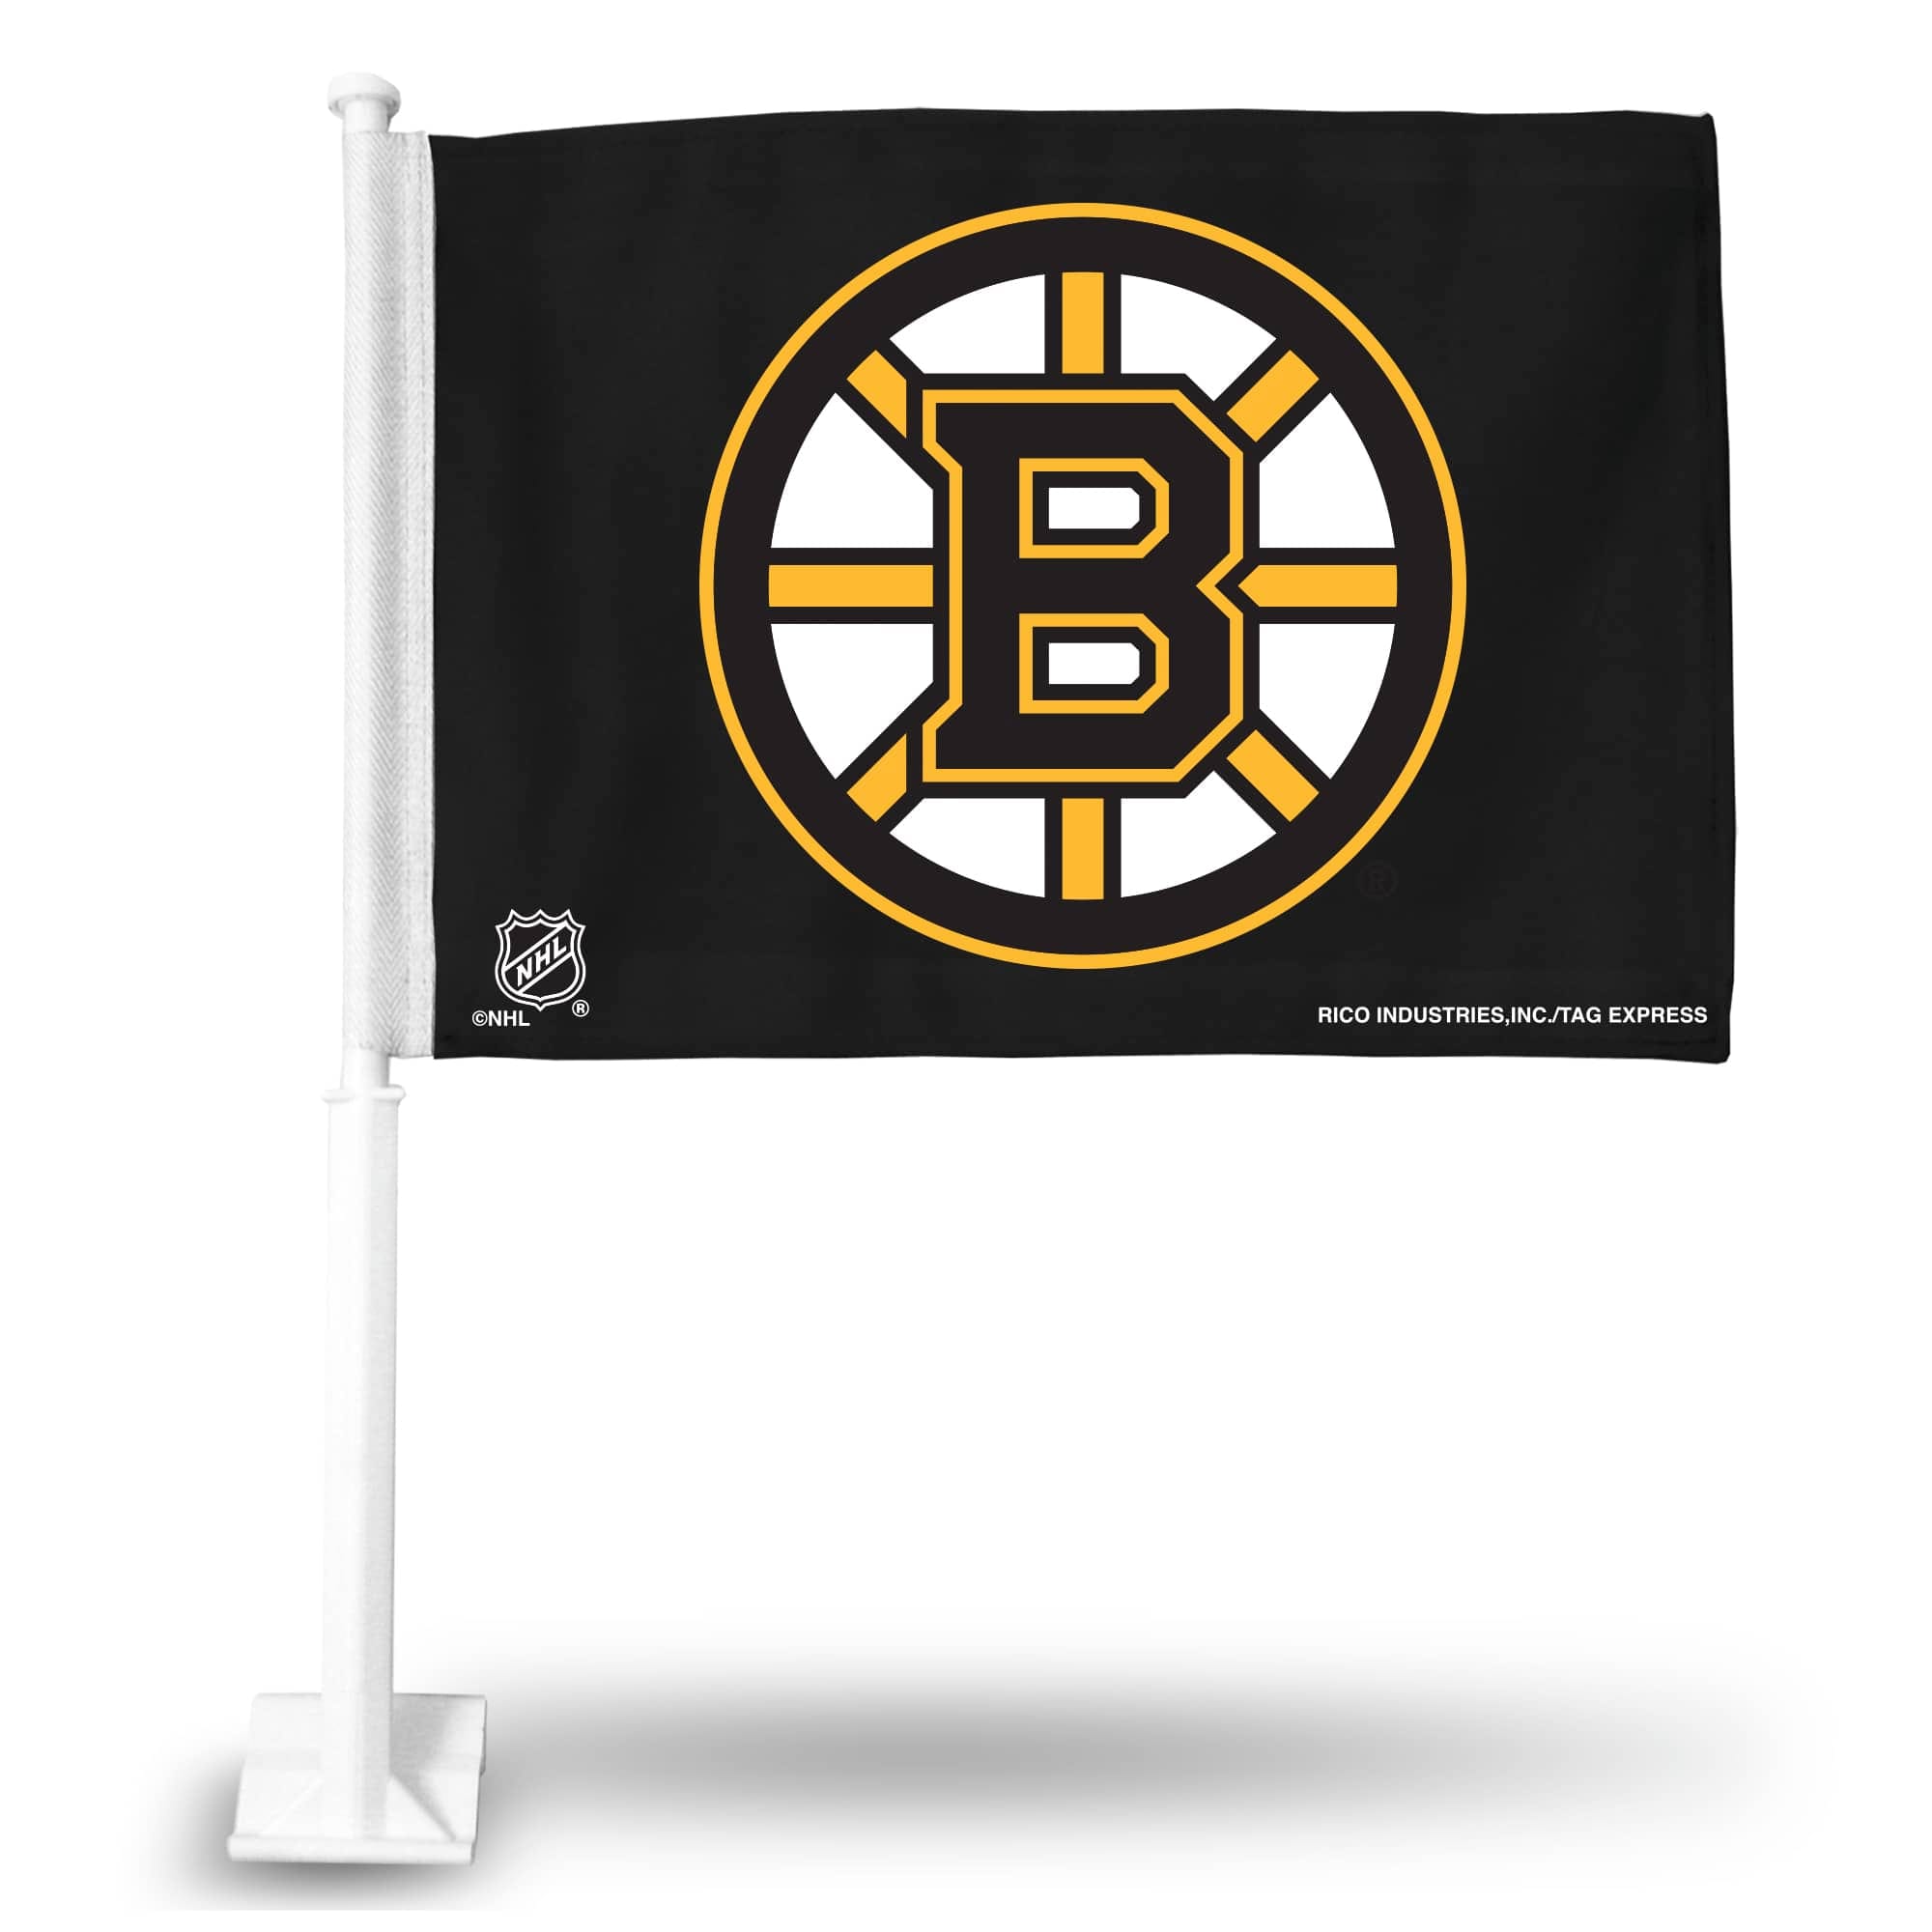 Rico Industries Boston  Hockey Double Sided Car Flag -  16" x 19" - Strong Pole that Hooks Onto Car/Truck/Automobile - image 1 of 5